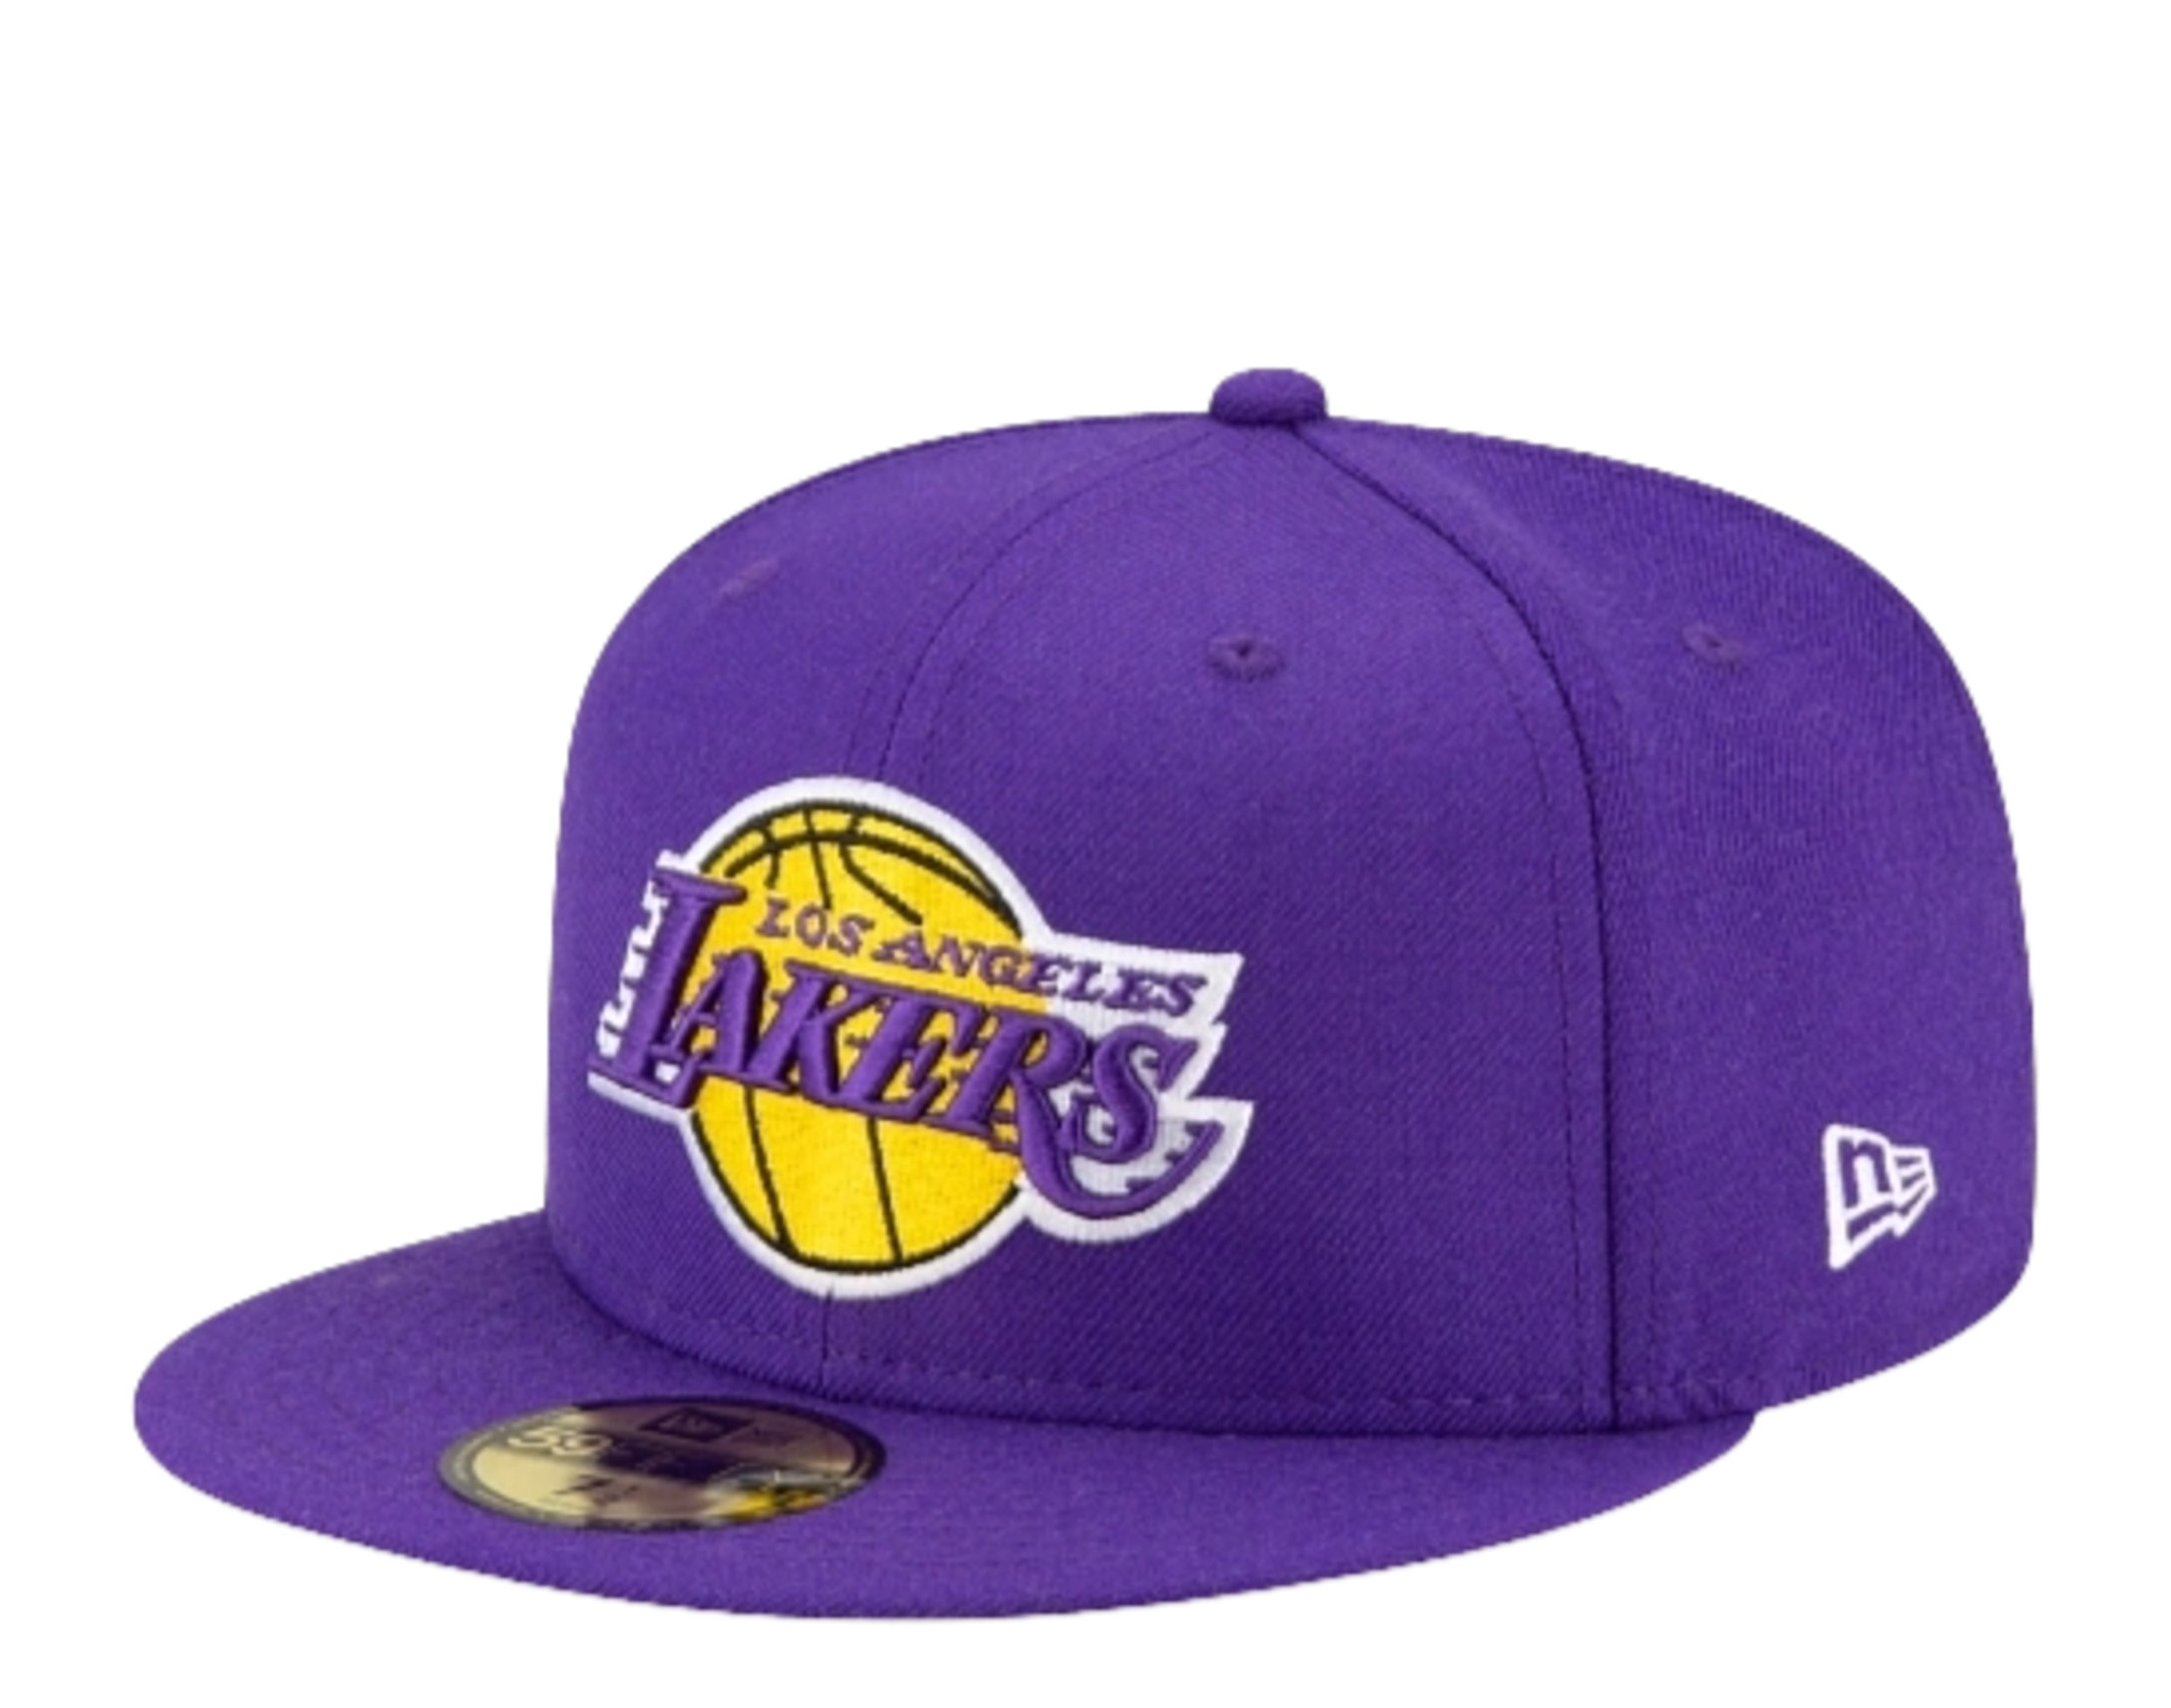 Los Angeles Lakers Fitted New Era 59FIFTY Sage Navy Cap Hat Grey UV